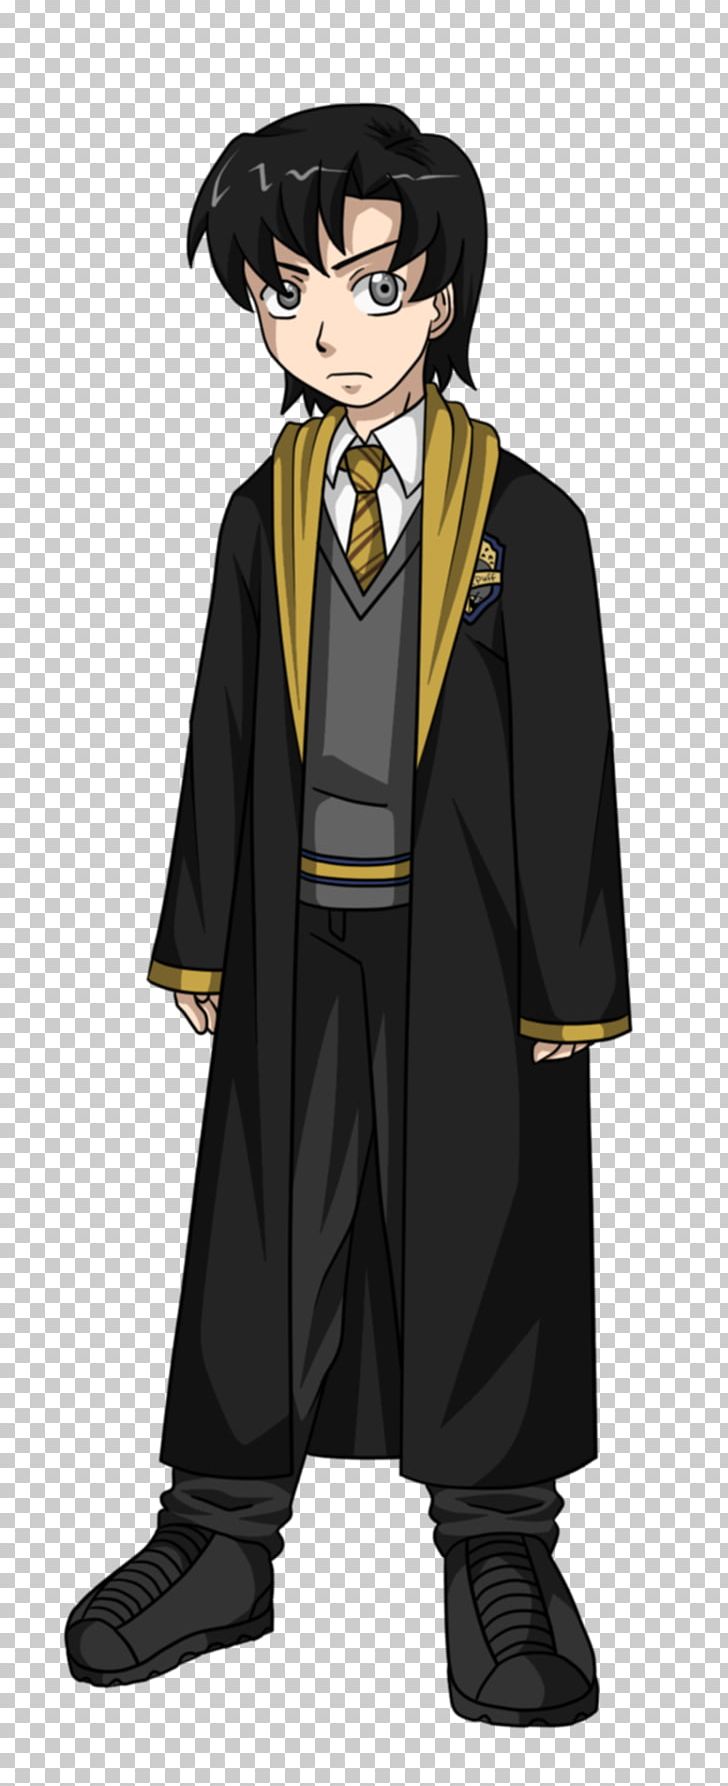 Harry Potter Nymphadora Lupin Dobby The House Elf Hogwarts Ravenclaw House PNG, Clipart, Academic Dress, Academician, Character, Chibi, Comic Free PNG Download